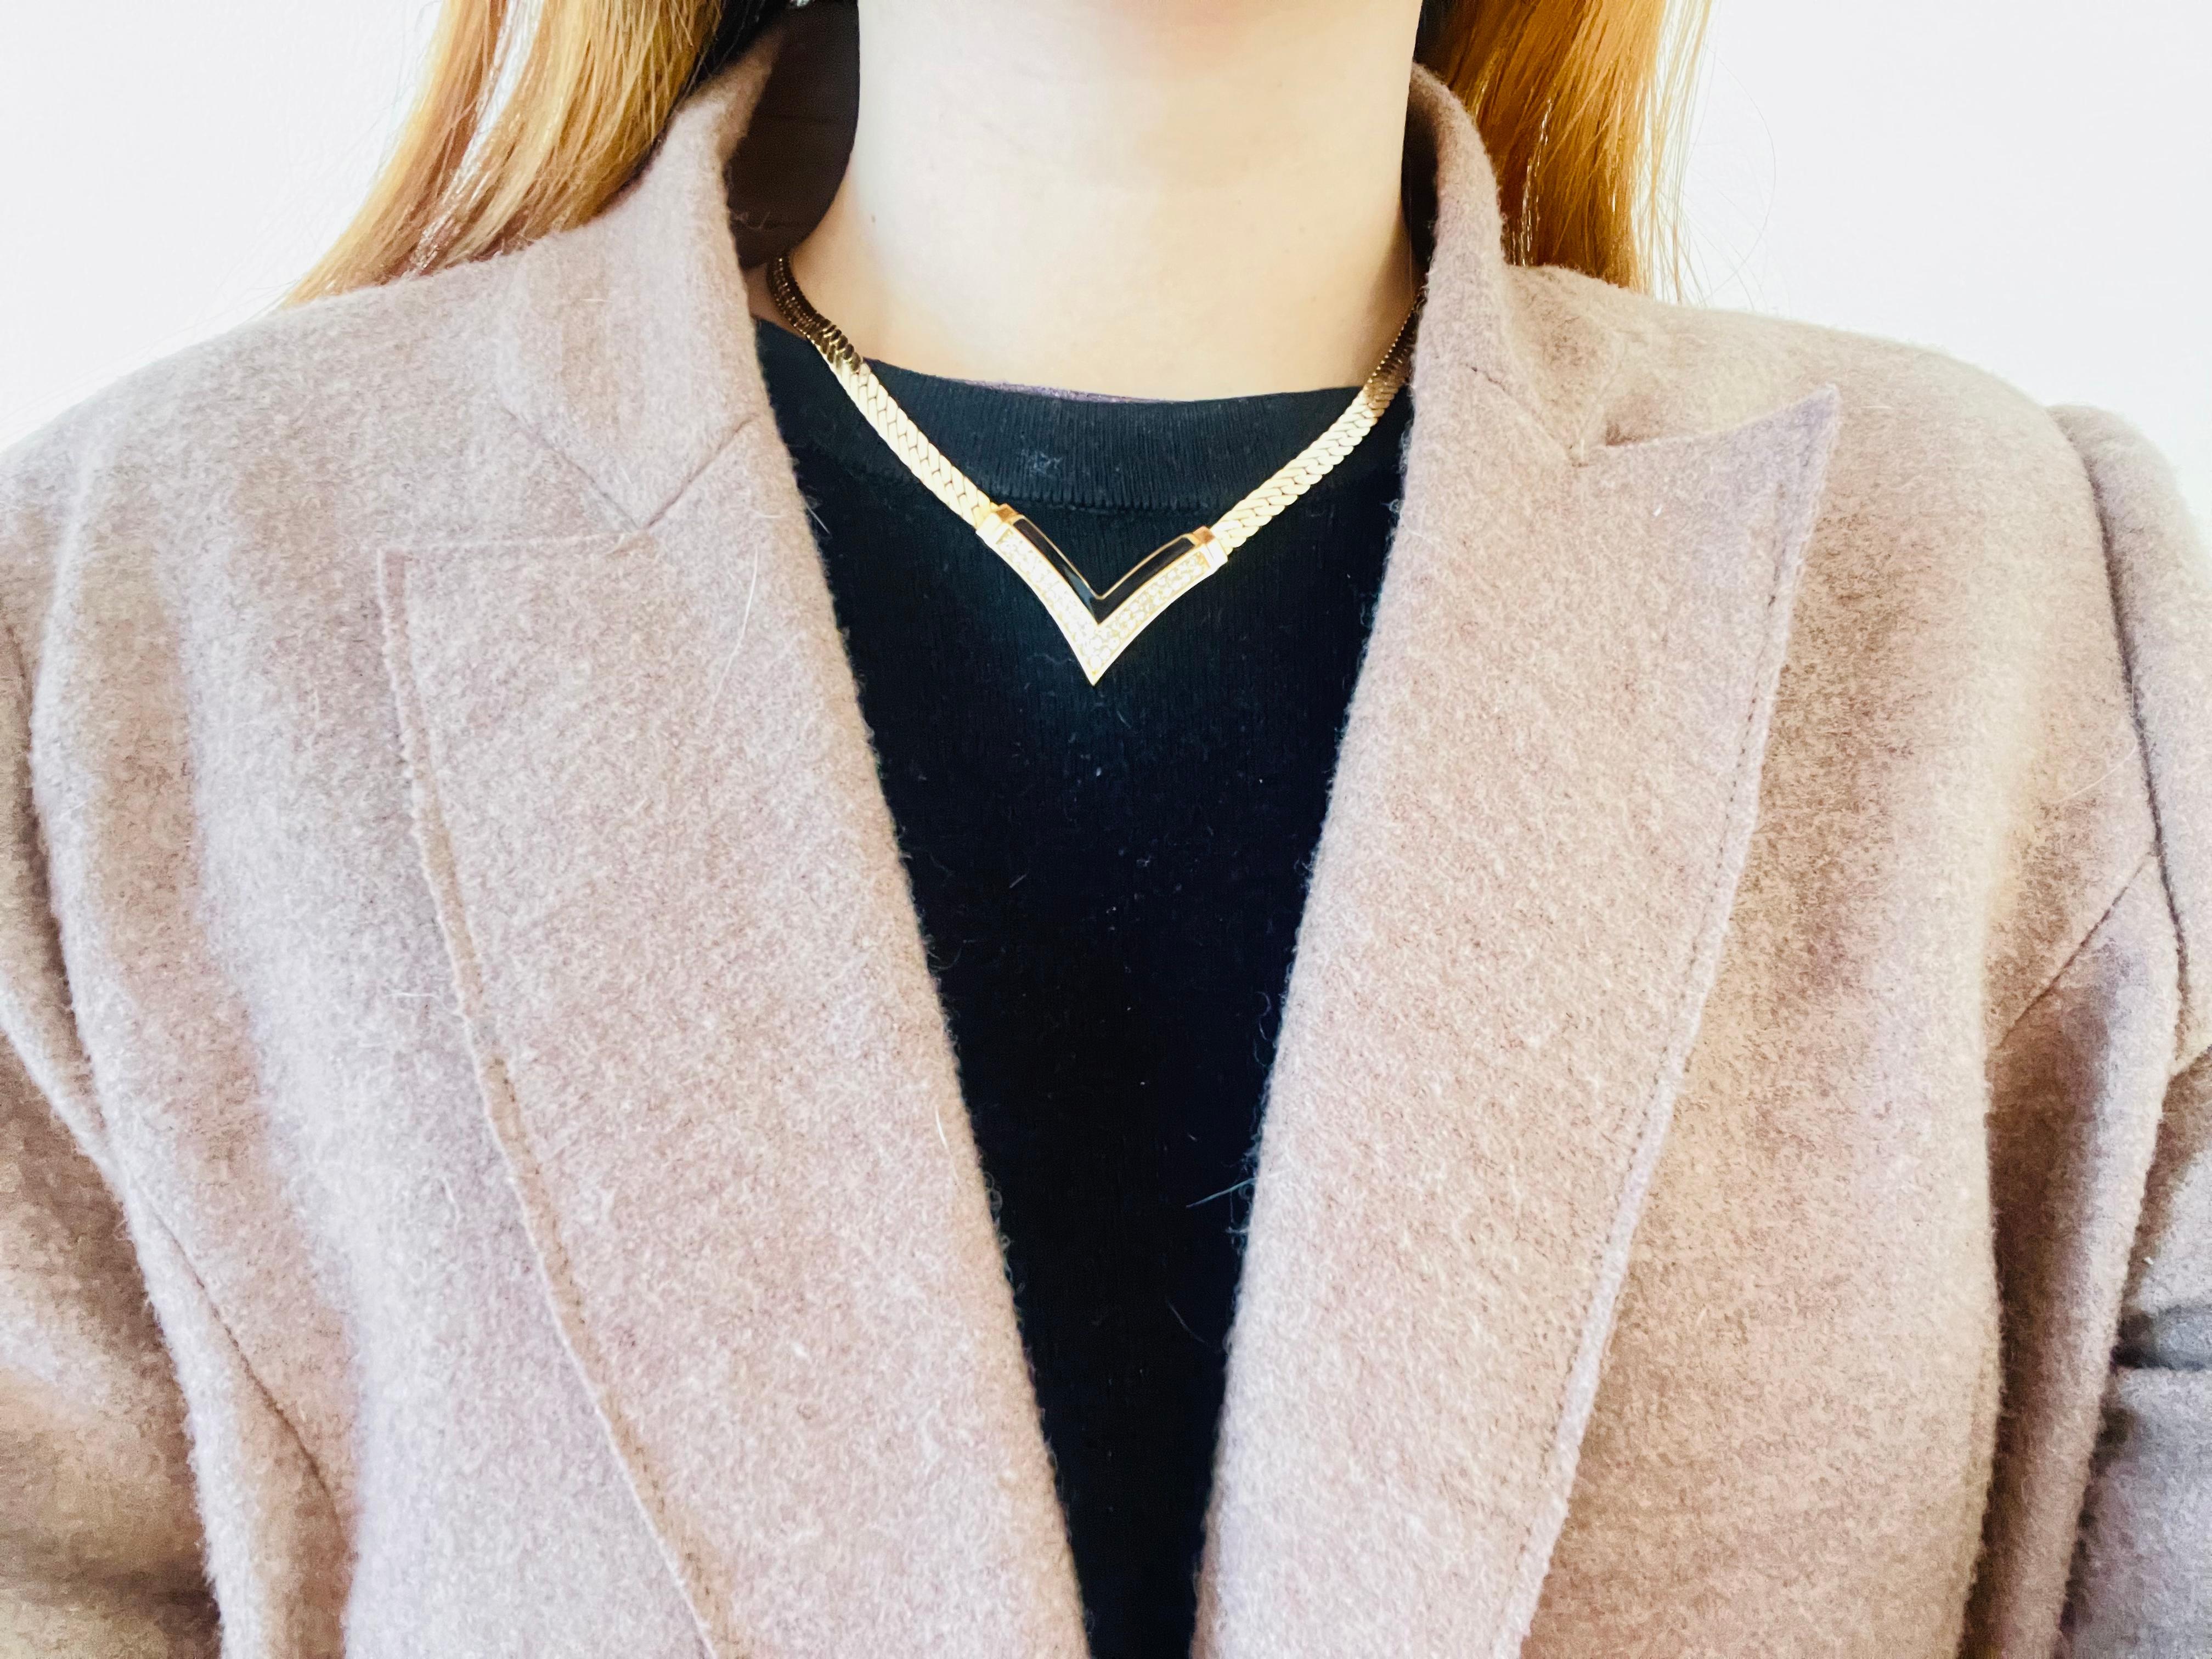 Christian Dior Vintage 1970s Black Crystal Arrow Triangle Pendant Gold Necklace In Excellent Condition For Sale In Wokingham, England